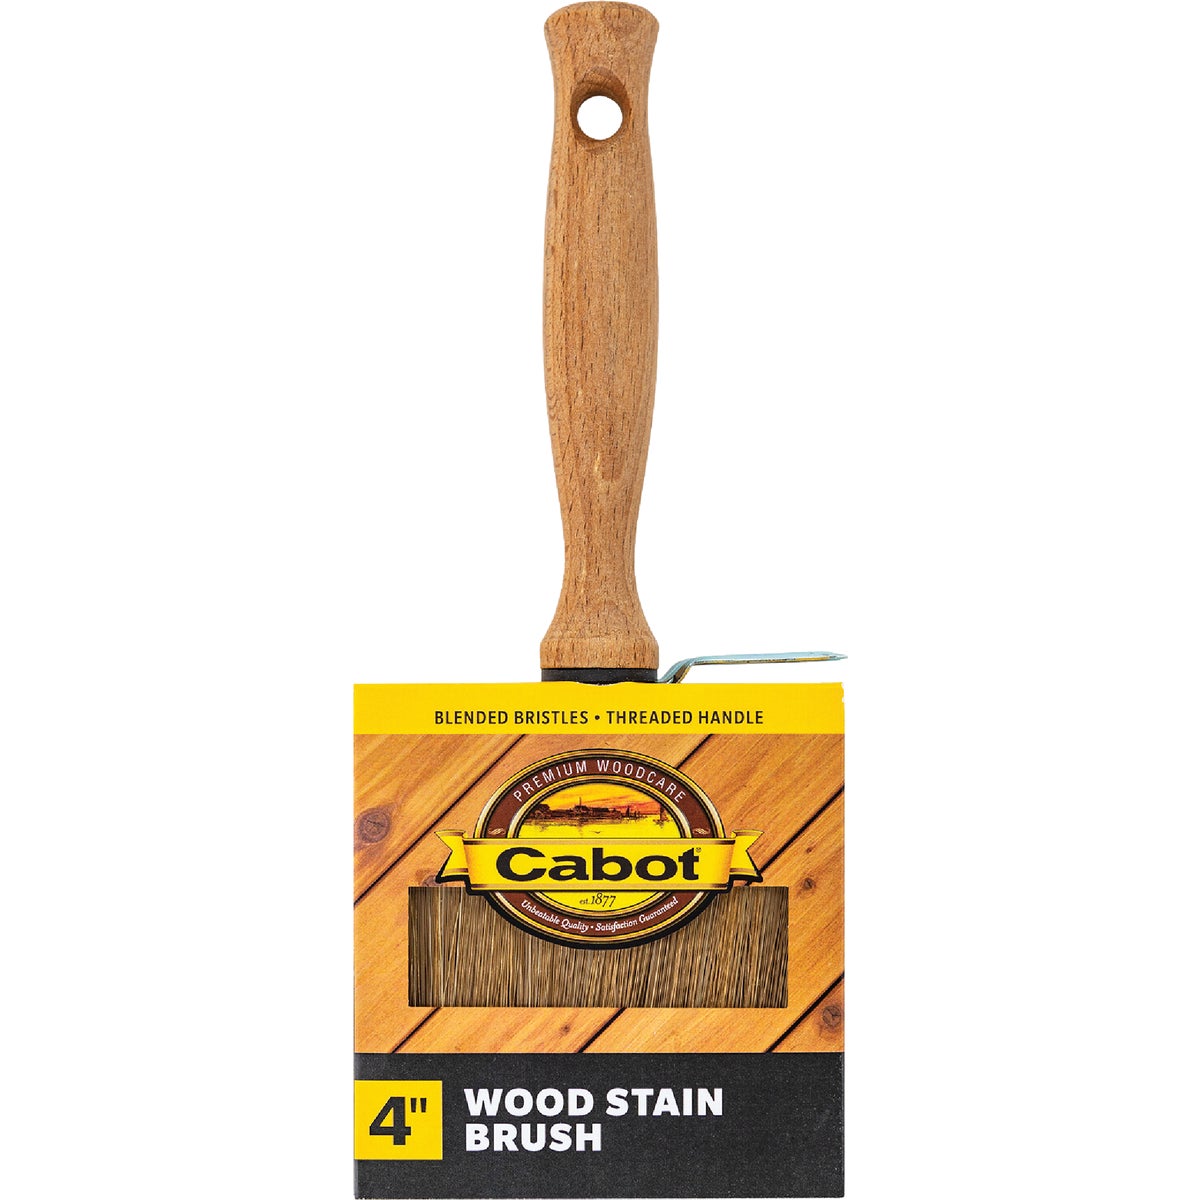 Item 770658, Natural bristle blend stain brush has a removable wood handle to allow for 